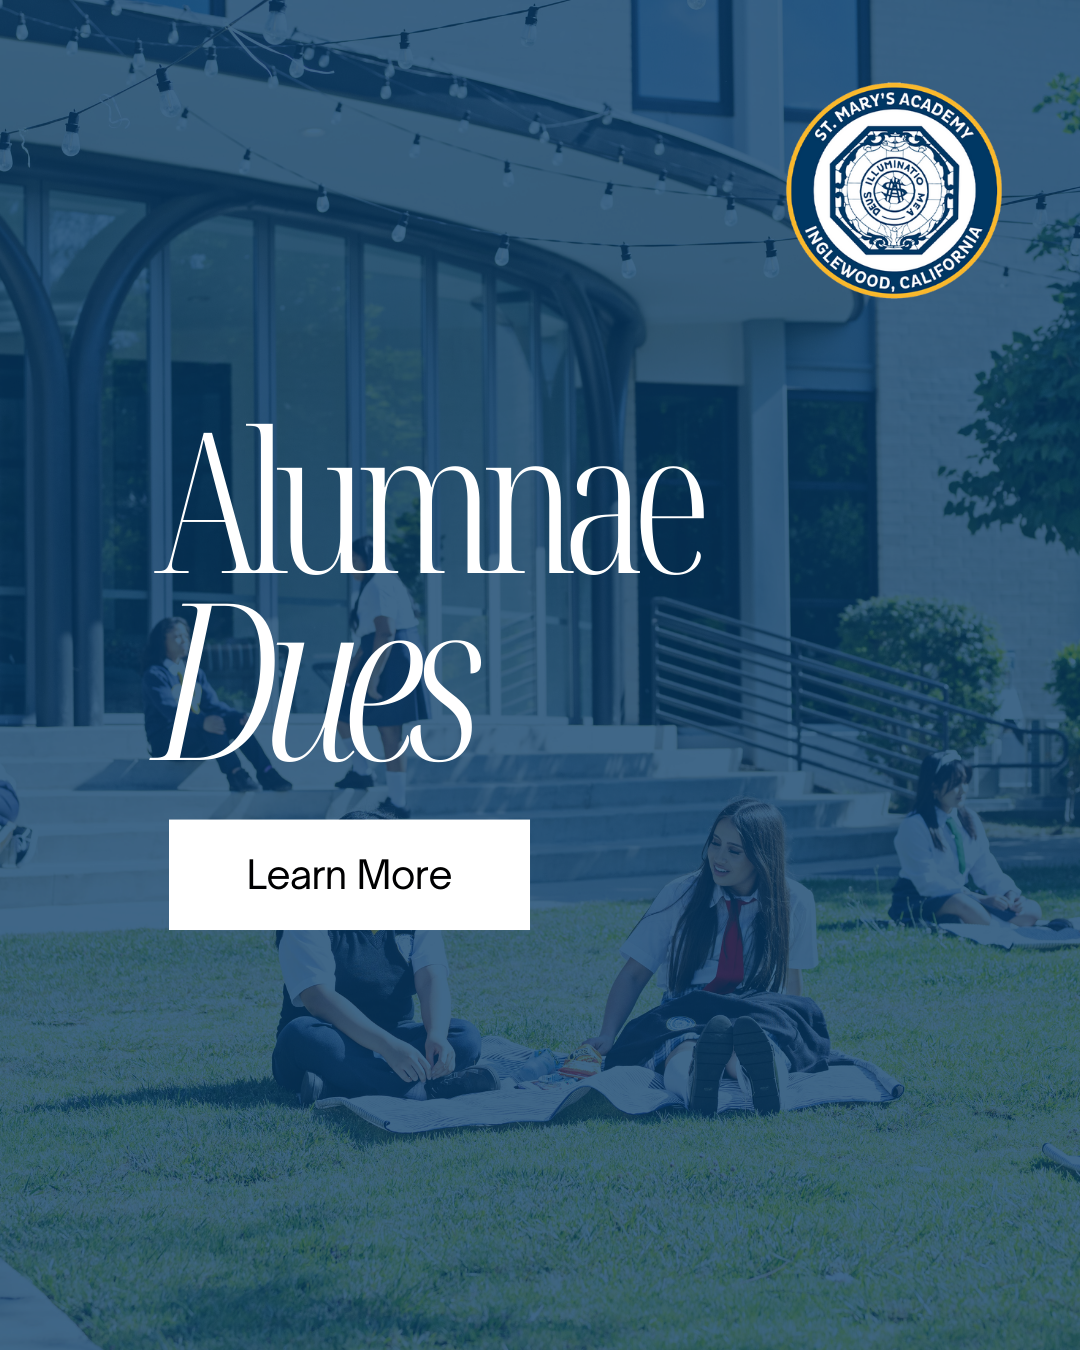 St. Mary's Academy Alumnae Dues